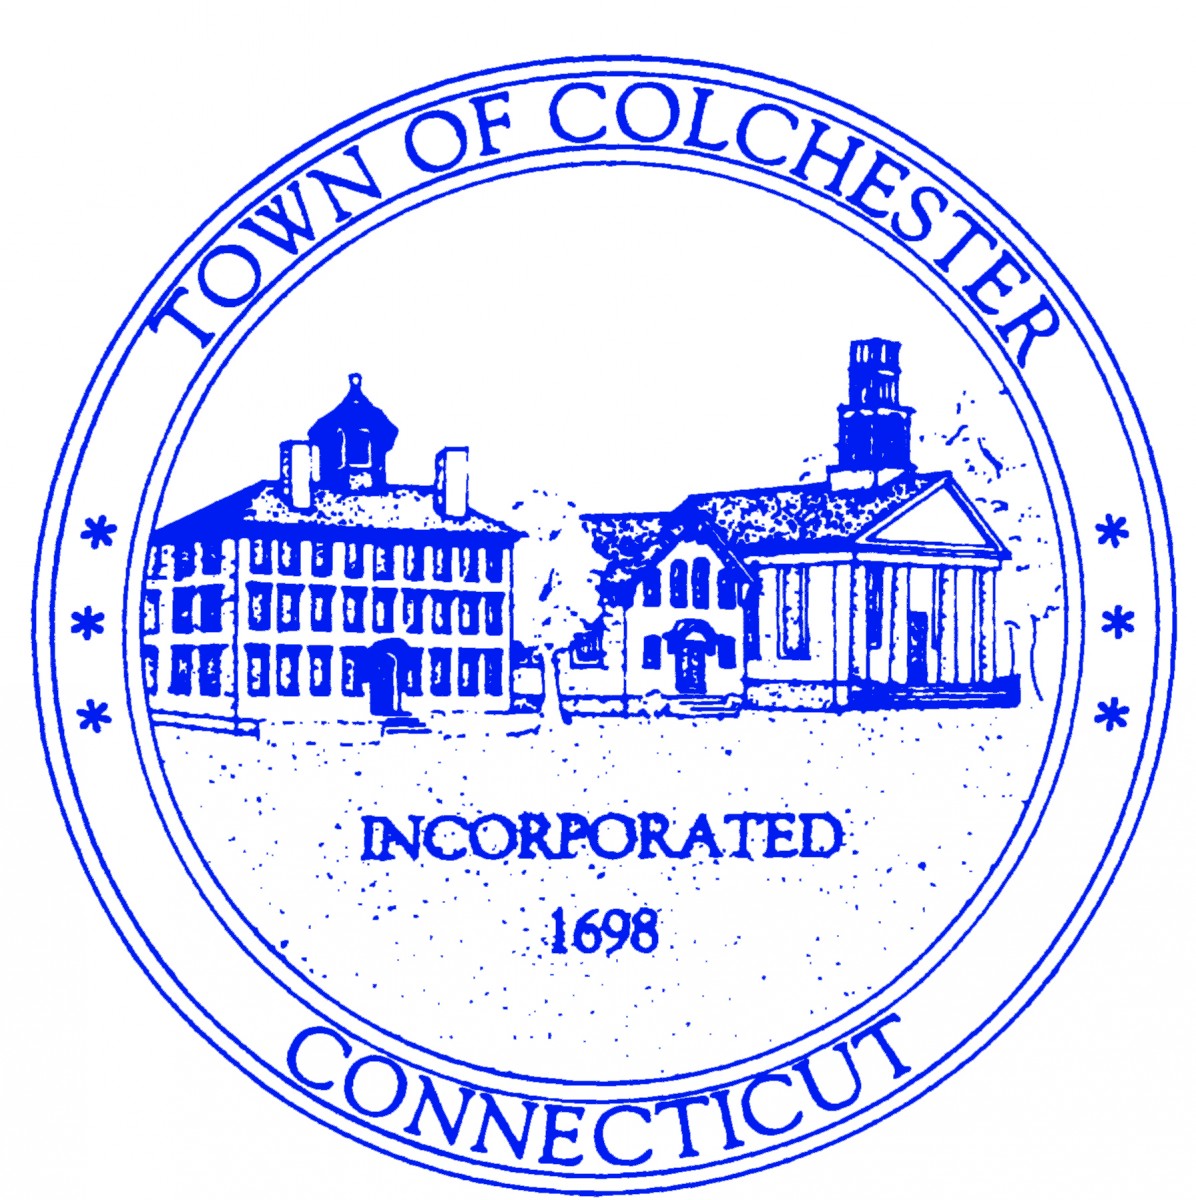 Furnace Cleaning in Colchester, CT